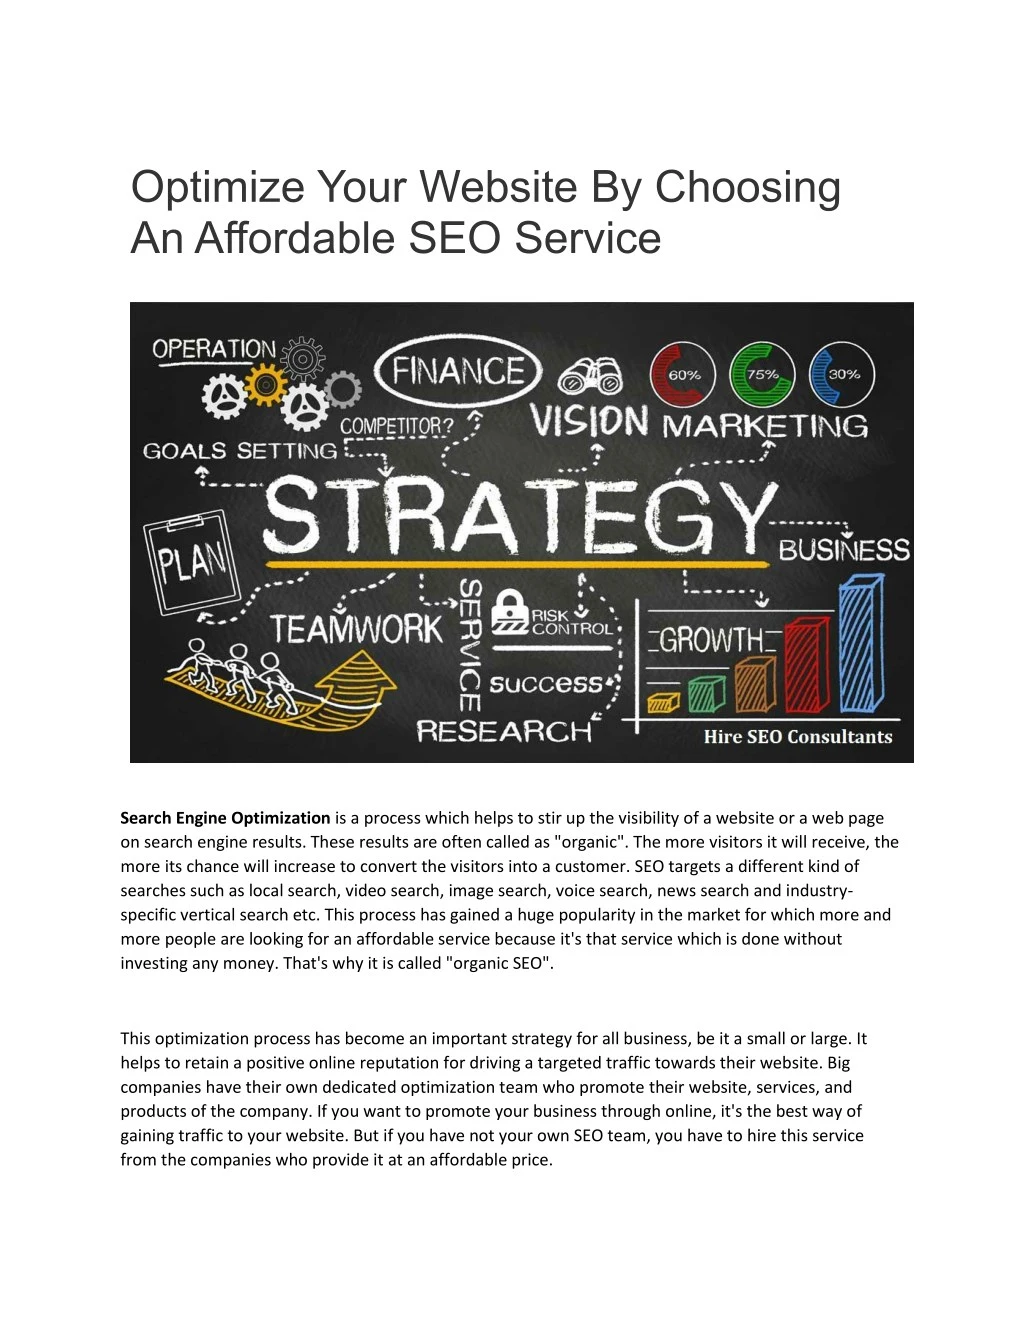 optimize your website by choosing an affordable